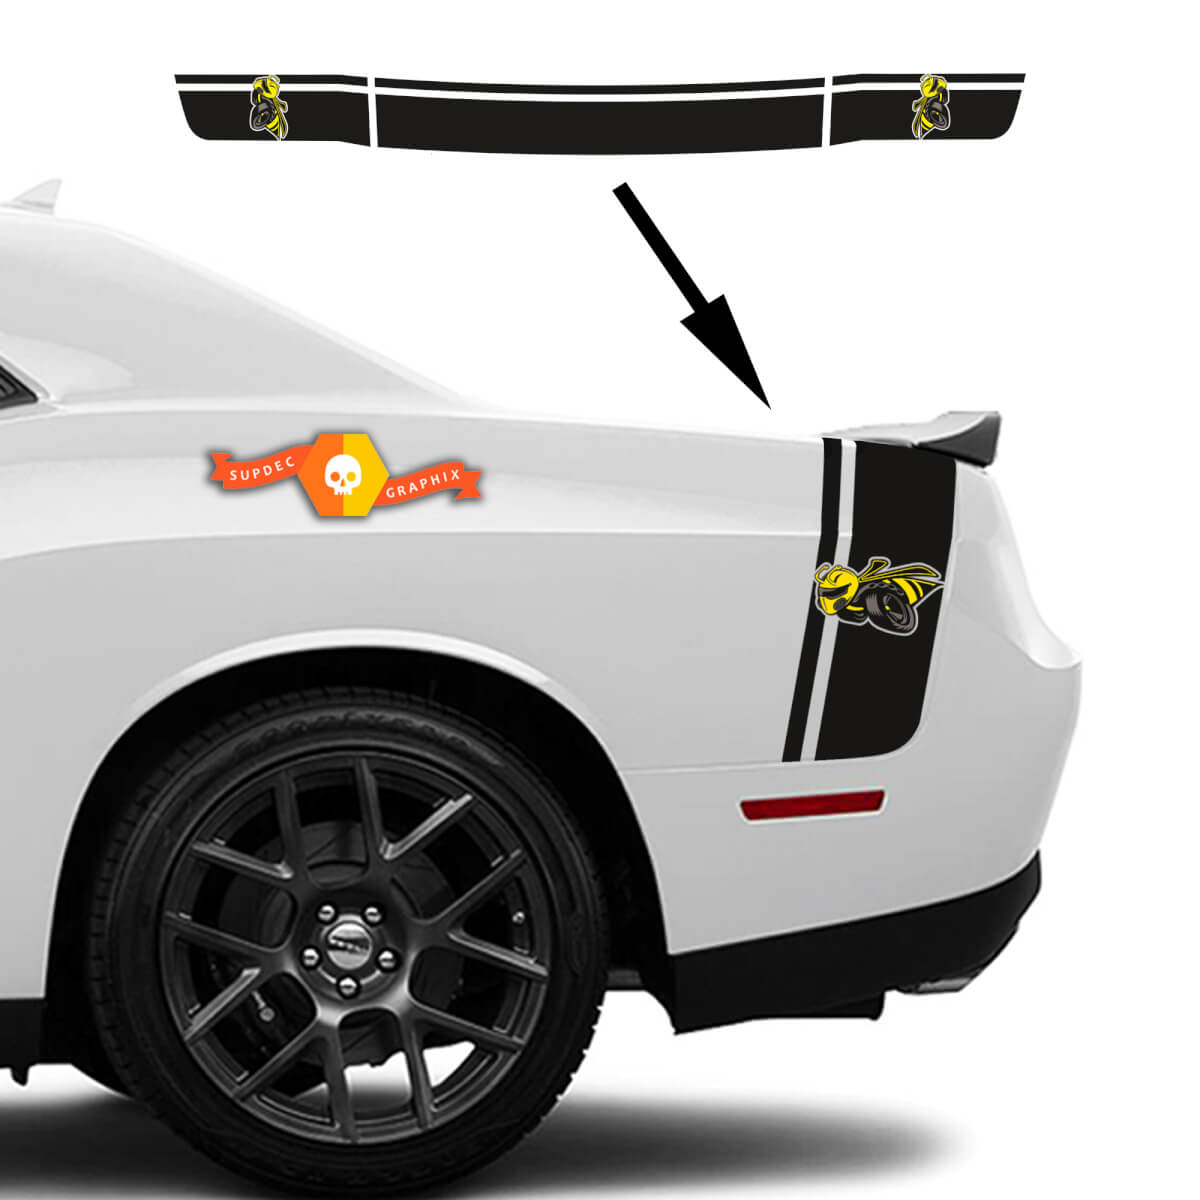 Kit Dodge Challenger or Charger Drag Bee Tail Bed Rear Stripe Decal kit trunk